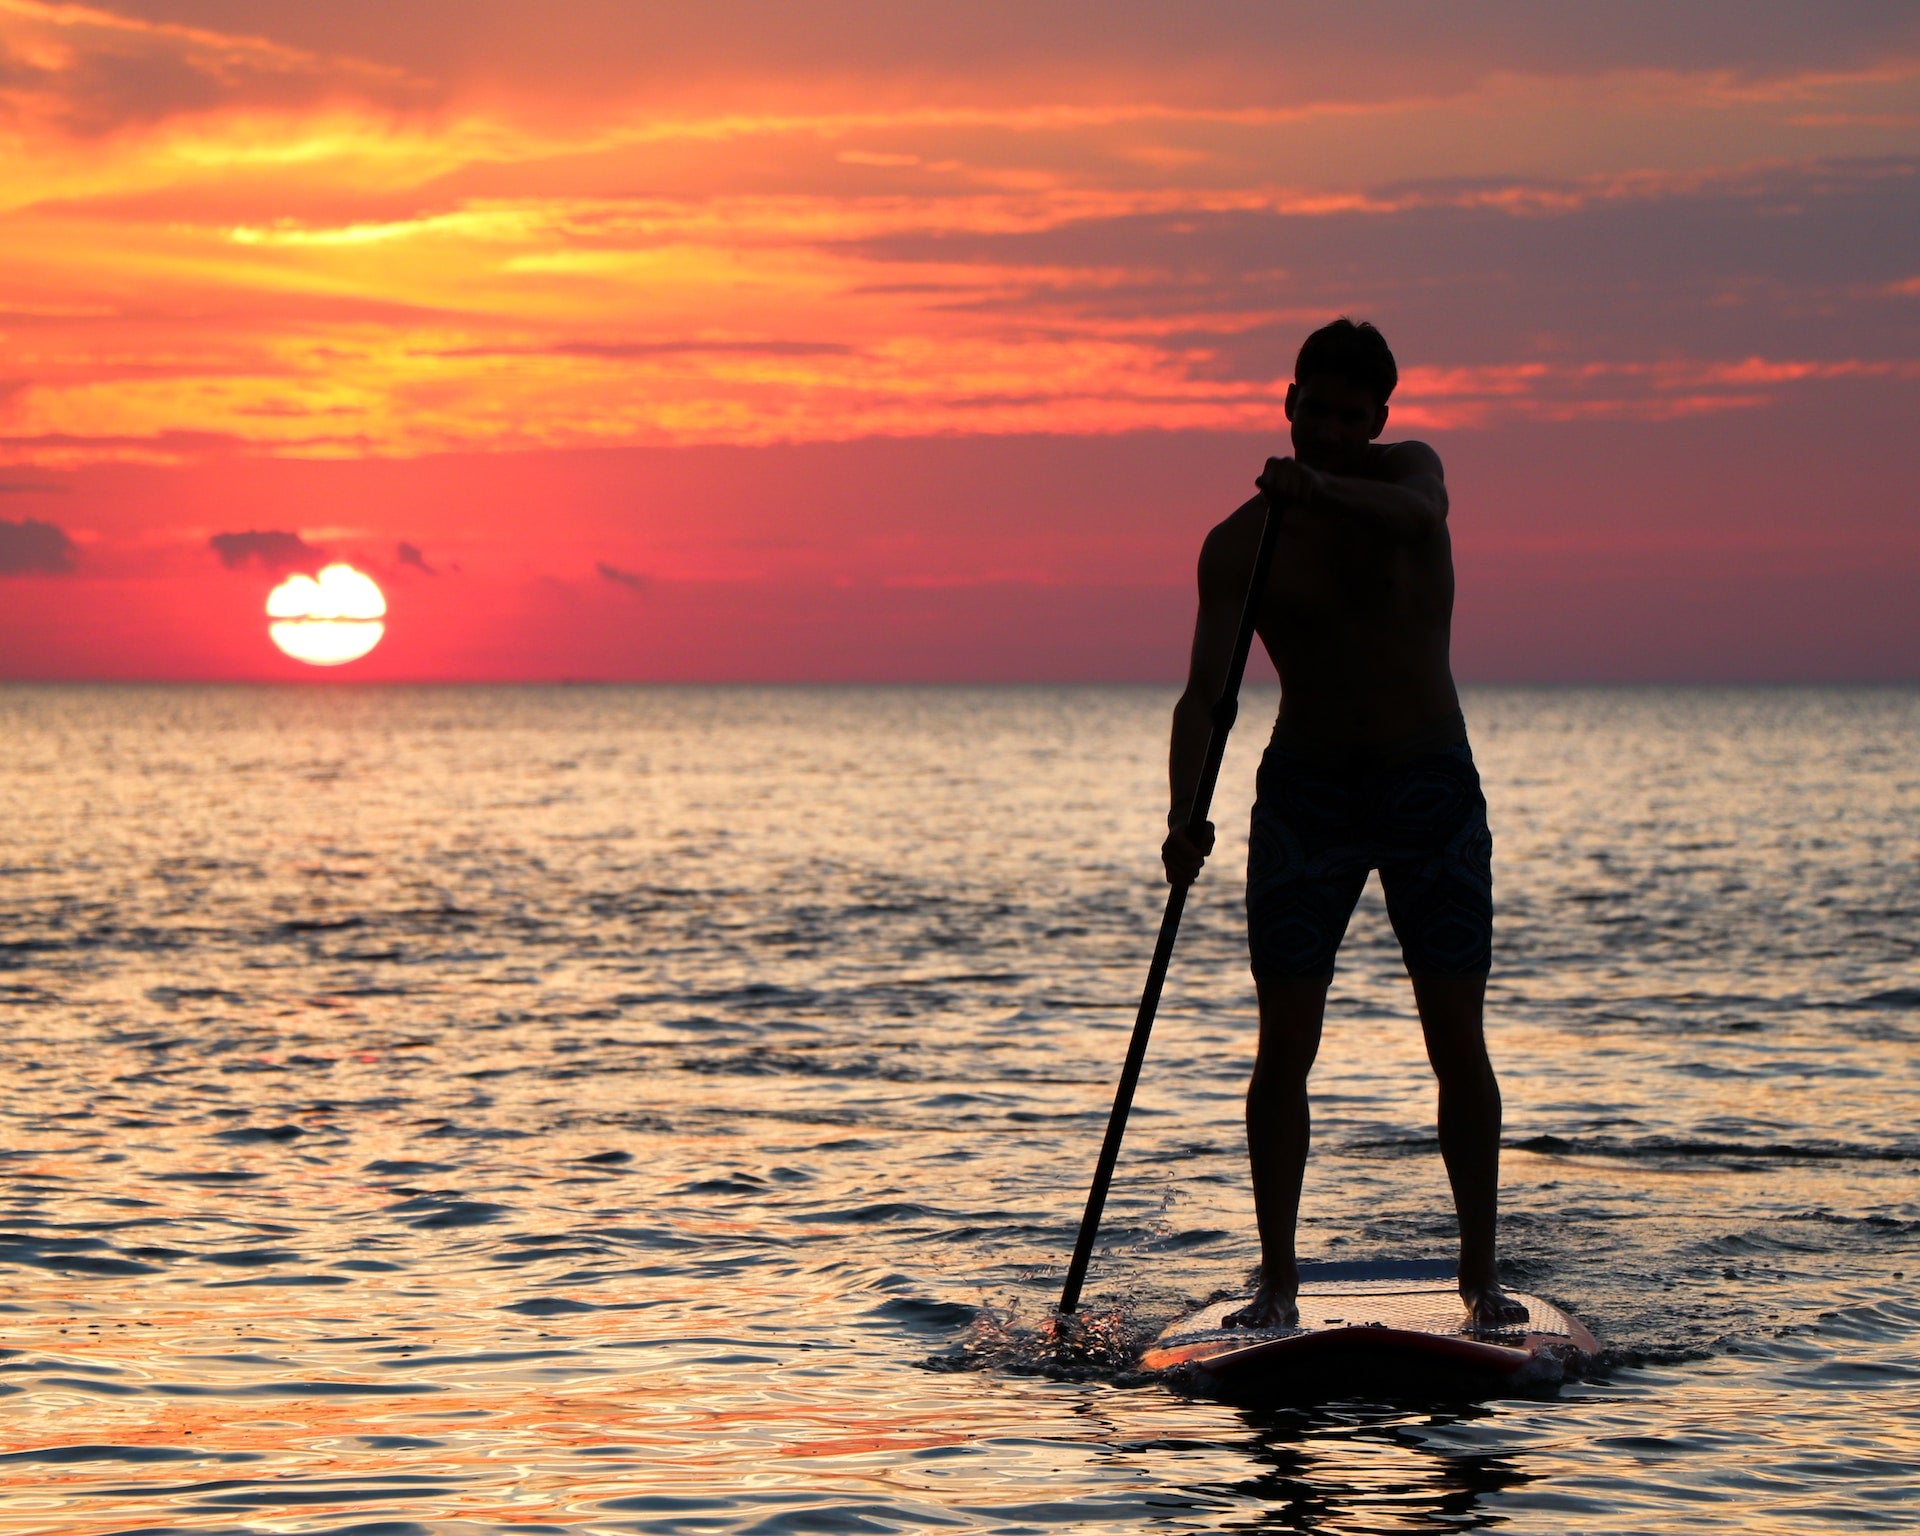 Mastering Balance on a Stand-Up Paddleboard (SUP)